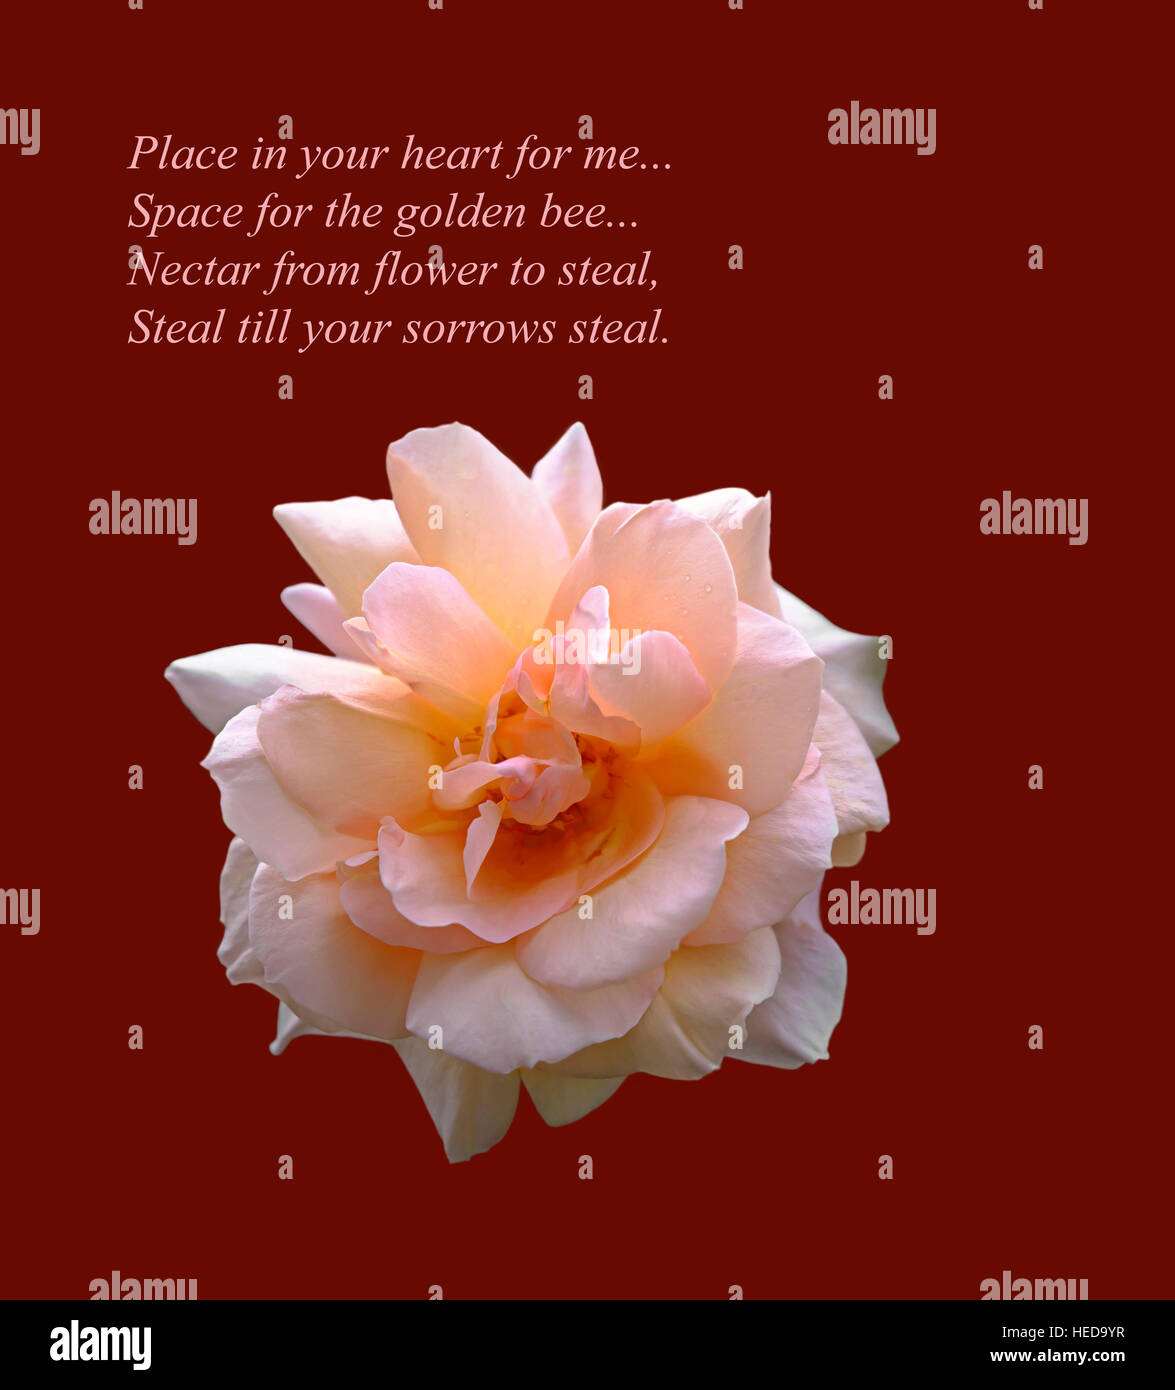 A beautiful pink rose cut-out on red background.  An original inspirational image and romantic verse by the poet Russ Merne. Stock Photo